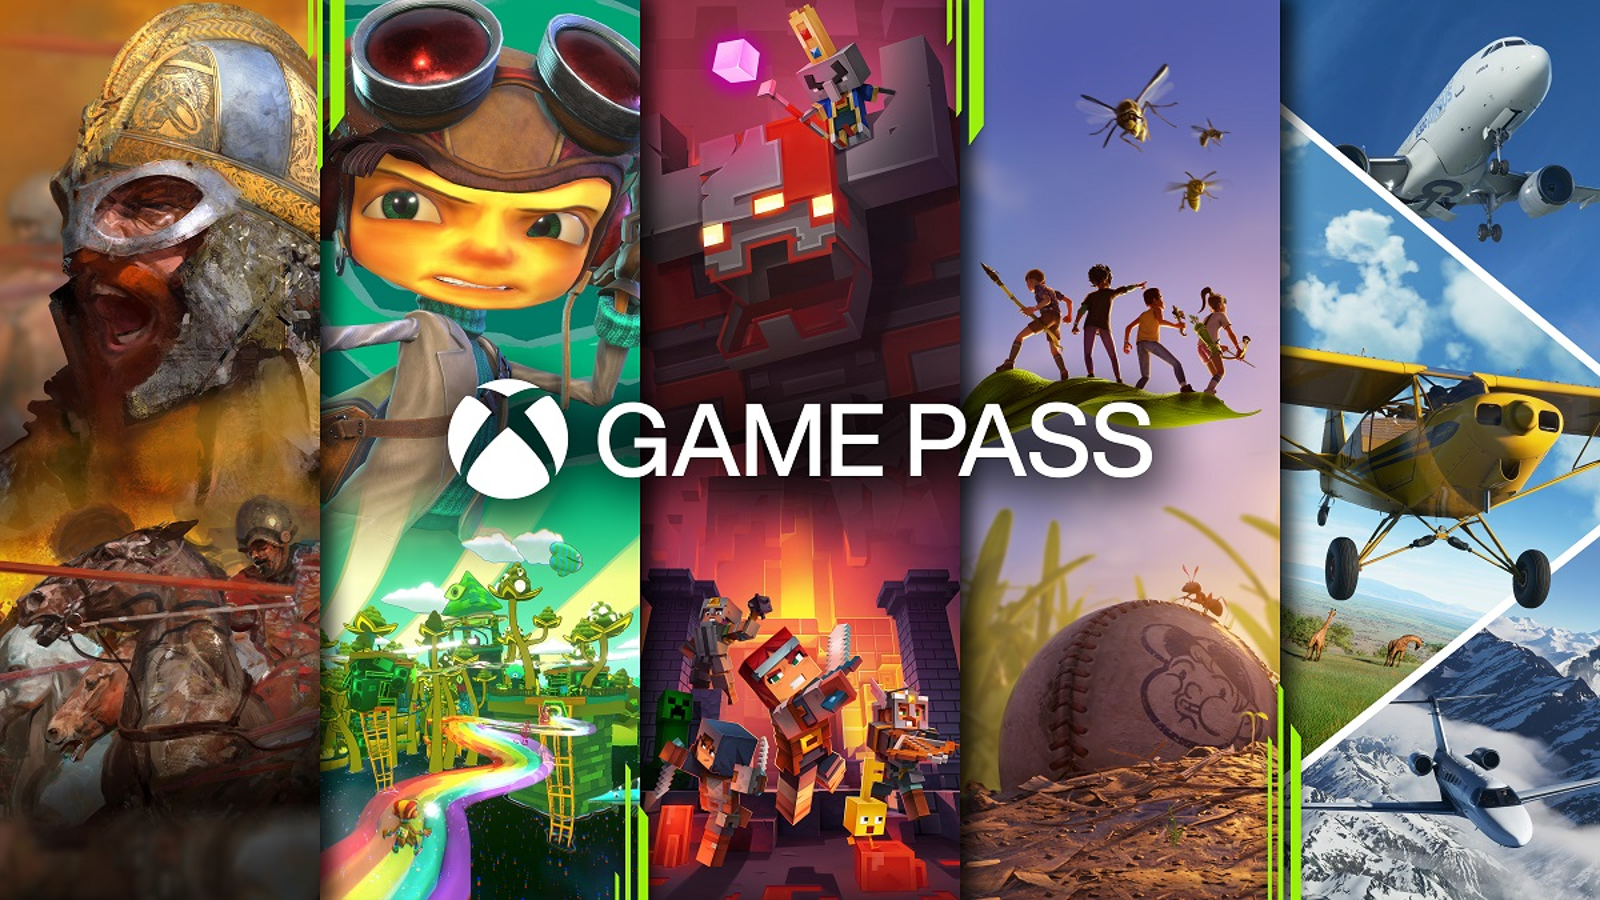 Microsoft shortens its Xbox Game Pass trials just before